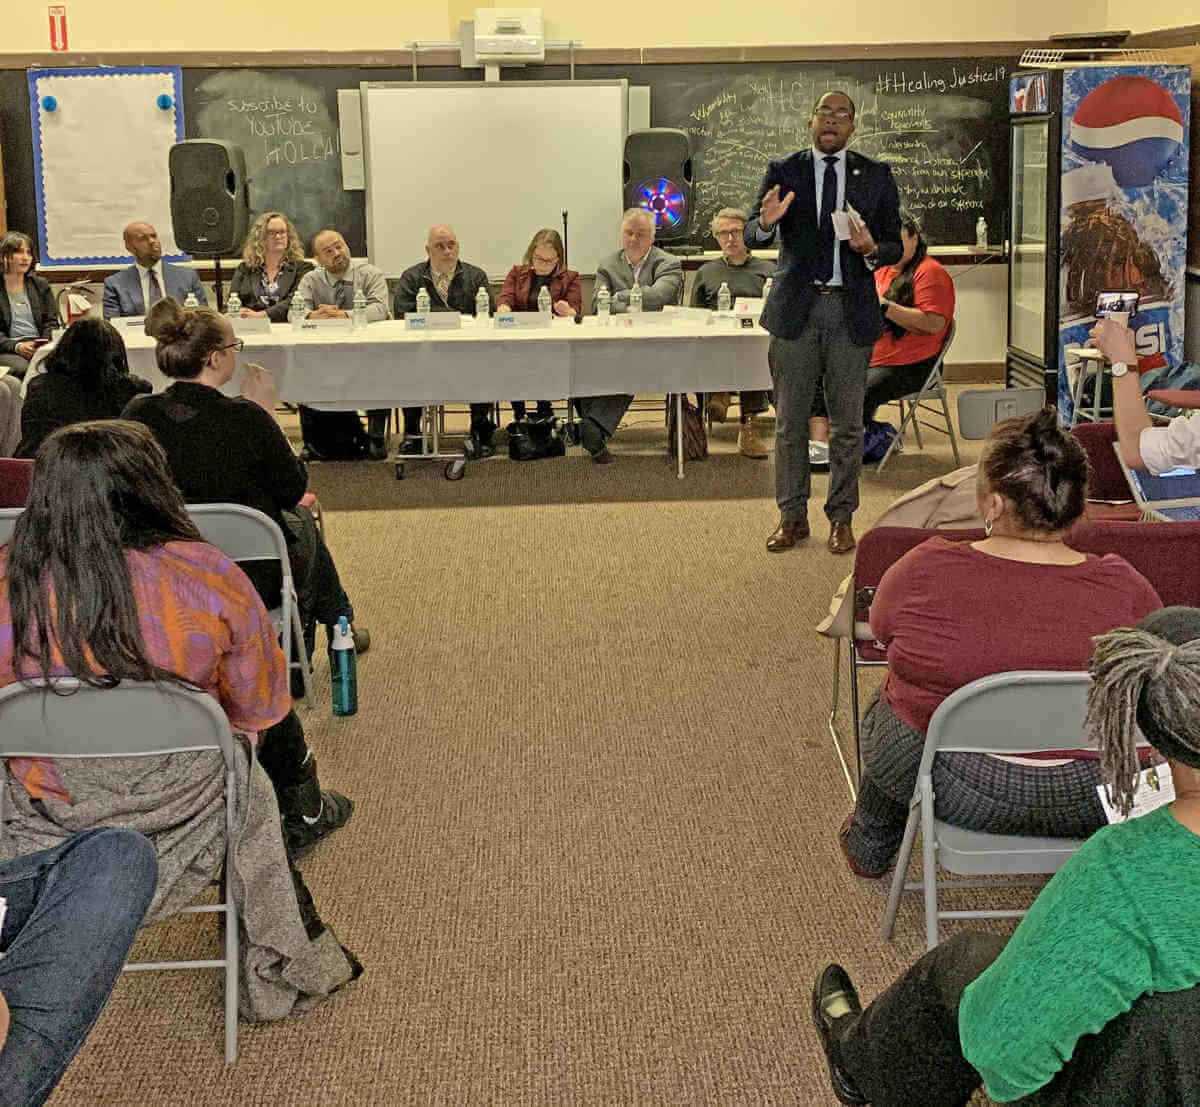 Myrie holds Housing Forum in Crown Heights|Myrie holds Housing Forum in Crown Heights